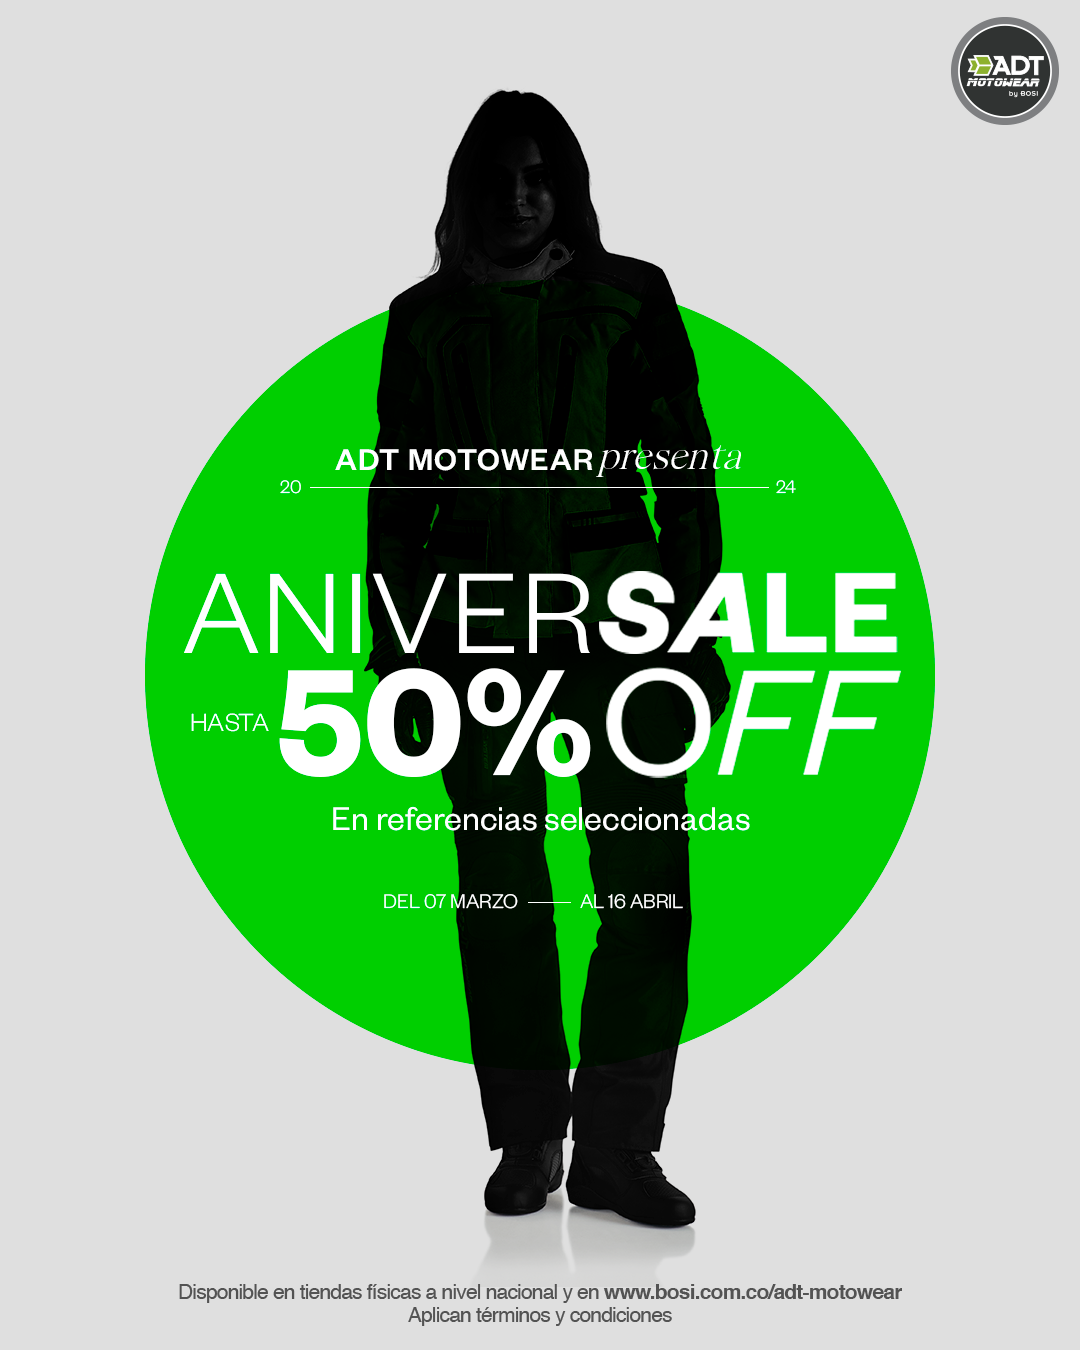 ¡ ANIVERSALE 50% OFF !